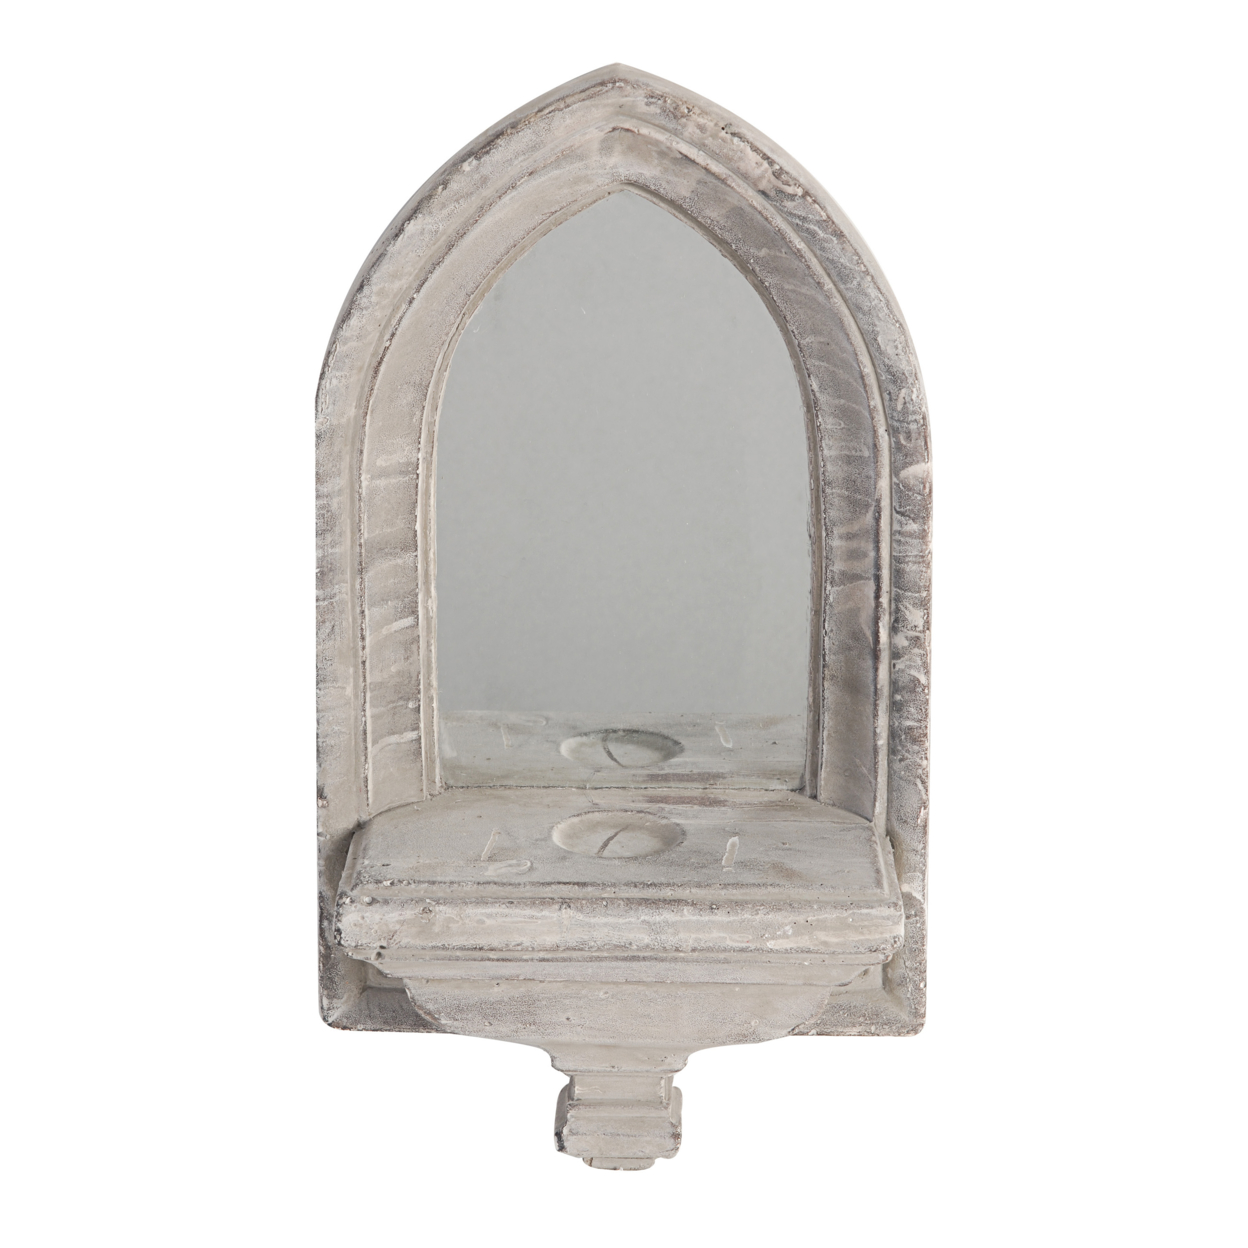 Cement Protected Decorative Wall Mirror, Washed White- Saltoro Sherpi